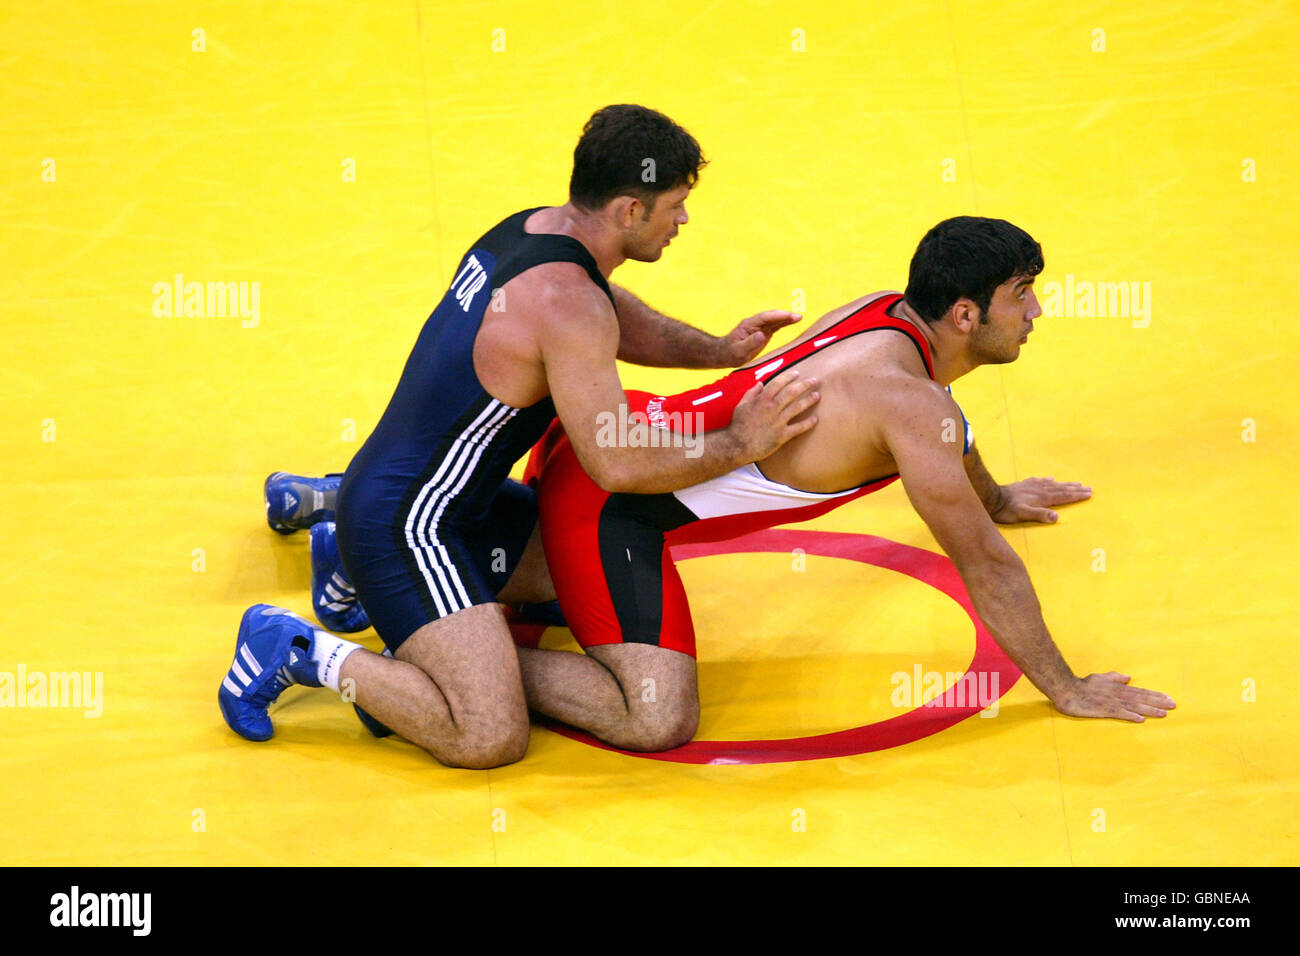 Wrestling - Athens Olympic Games 2004 - Men's Greco-Roman 96kg - Bronze Medal Match Stock Photo